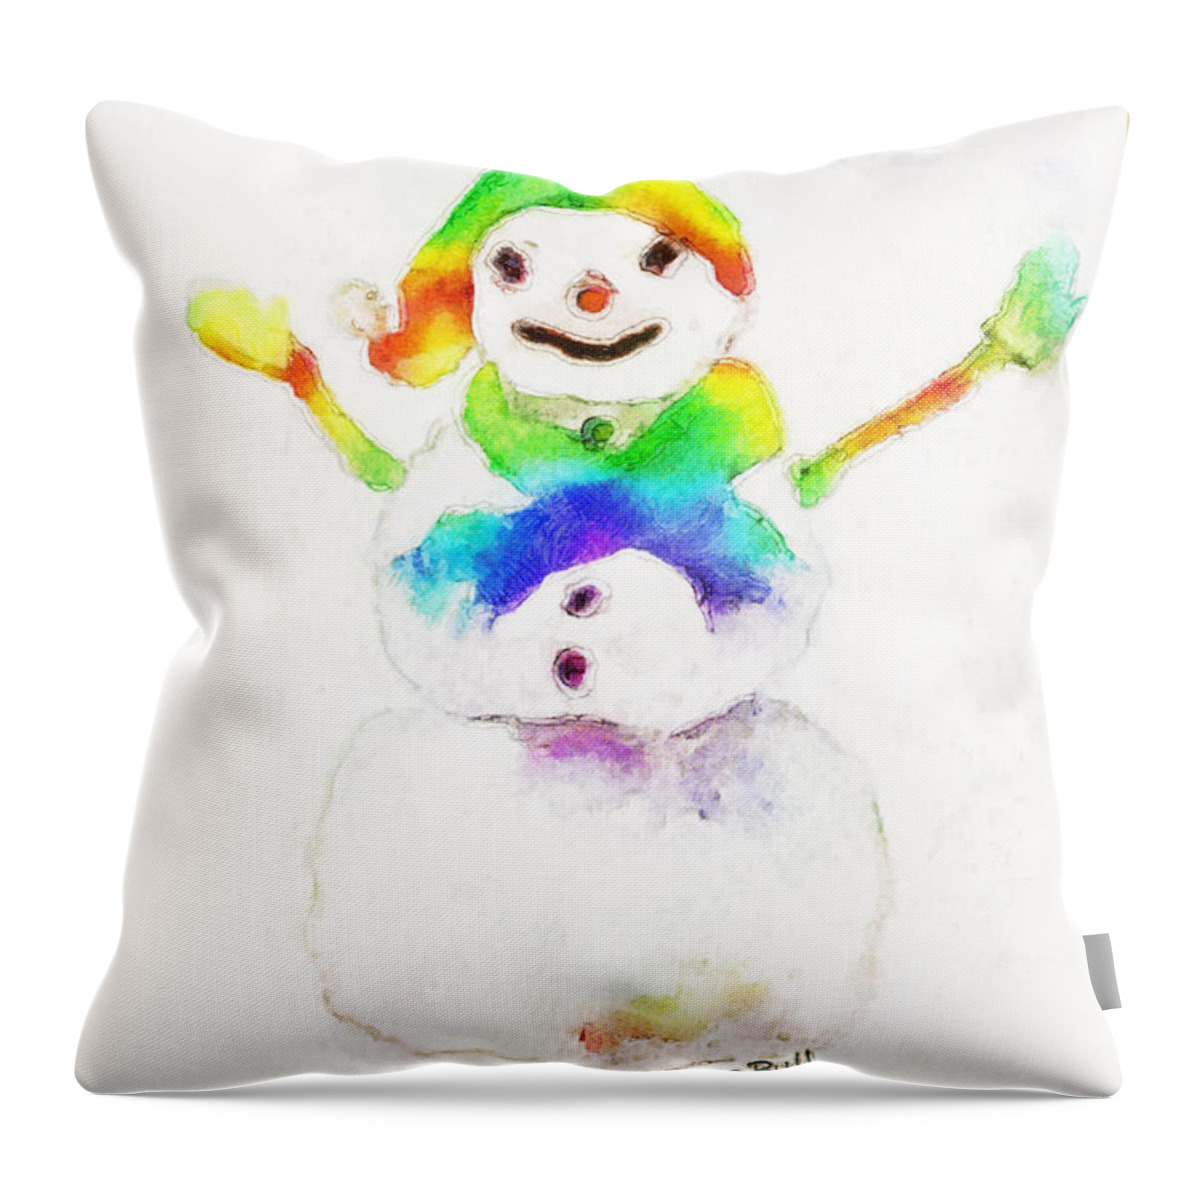 Snowman Throw Pillow featuring the painting Snowman with Rainbow 1 by Claire Bull